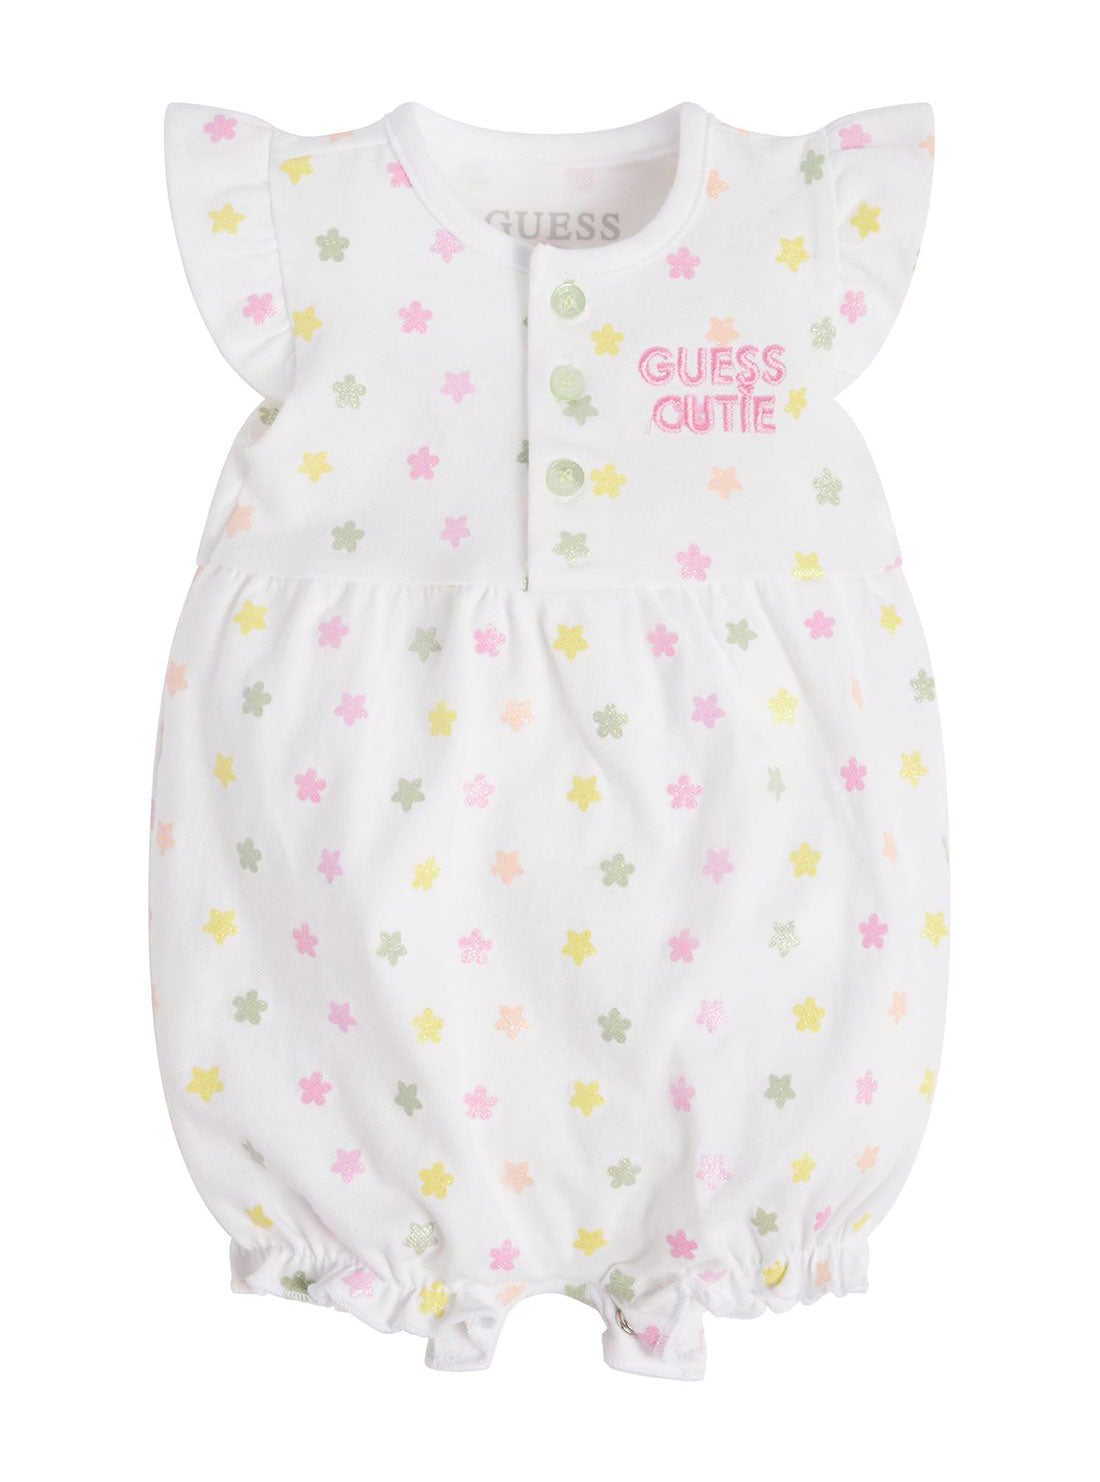 White Glitter Flower Onesie | GUESS Baby | Front view